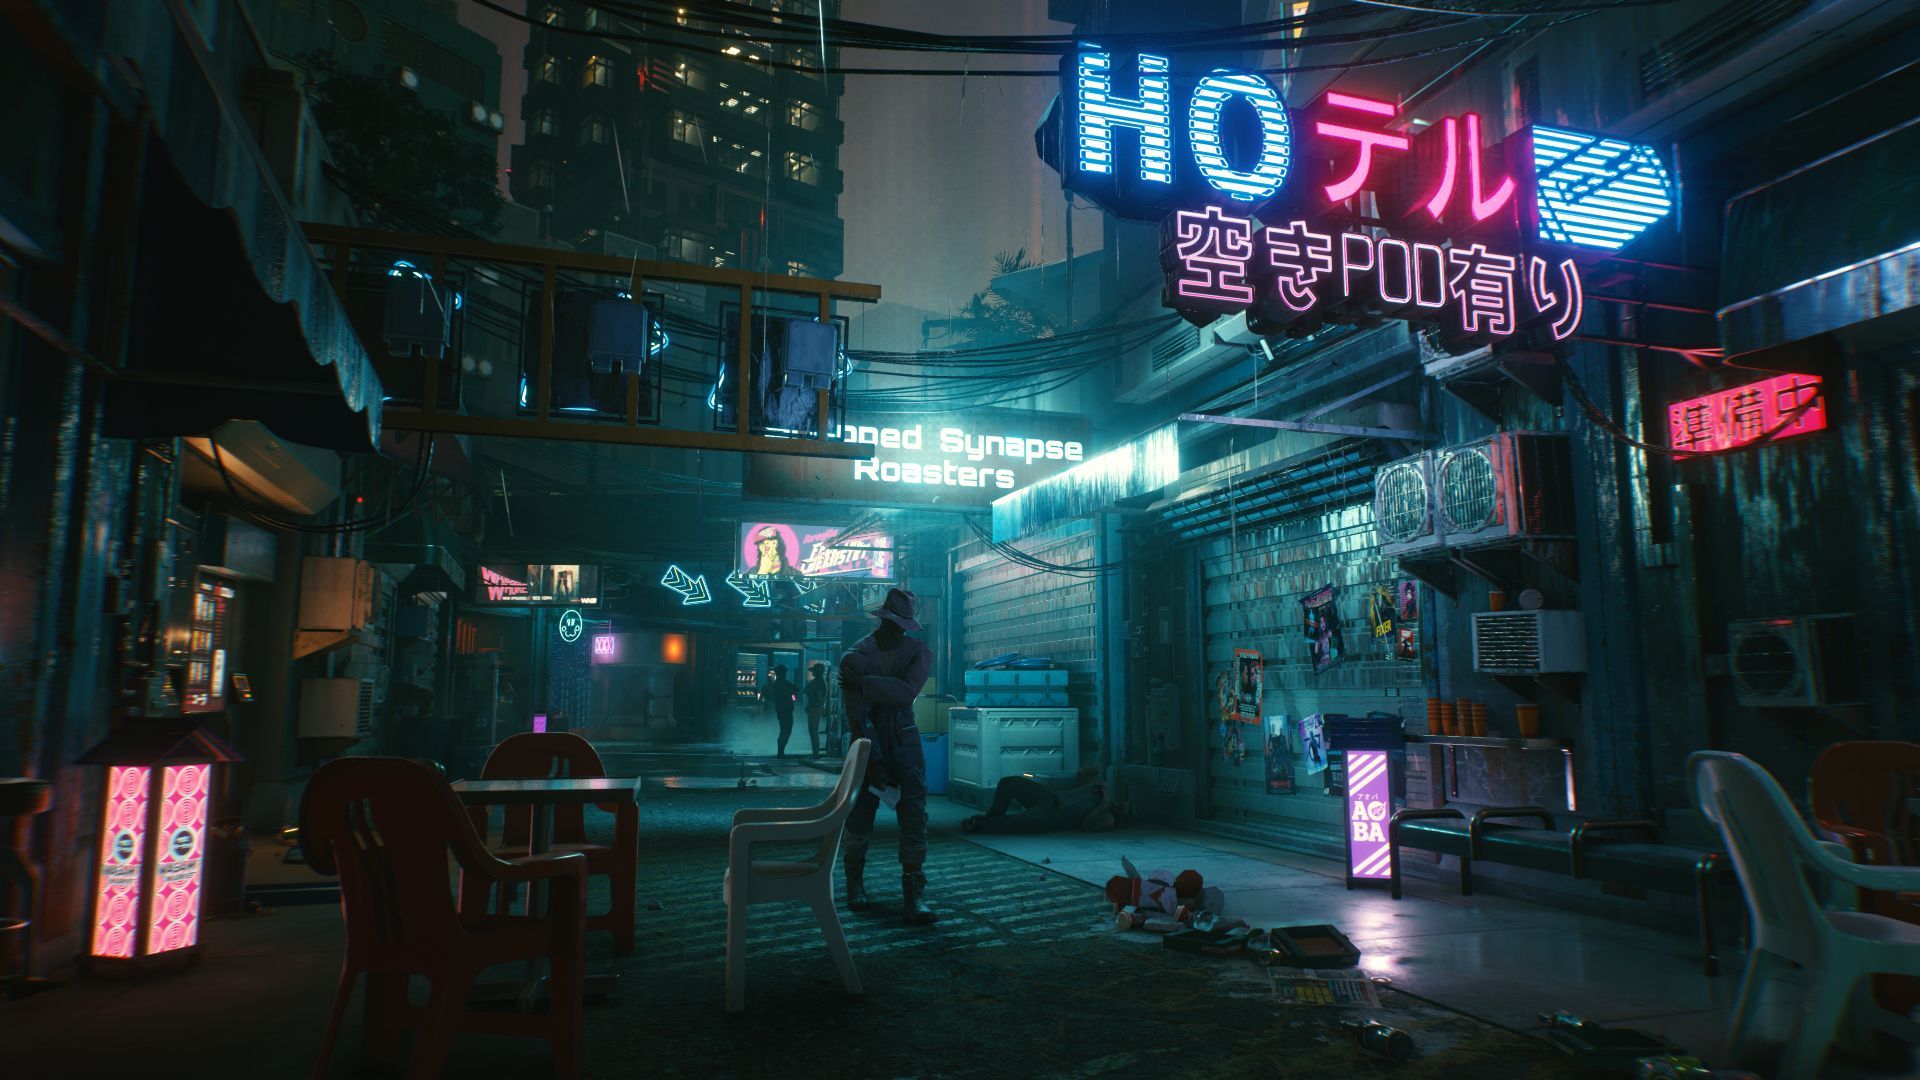 Cyberpunk 2077 Pre Orders In China Reportedly “top The World